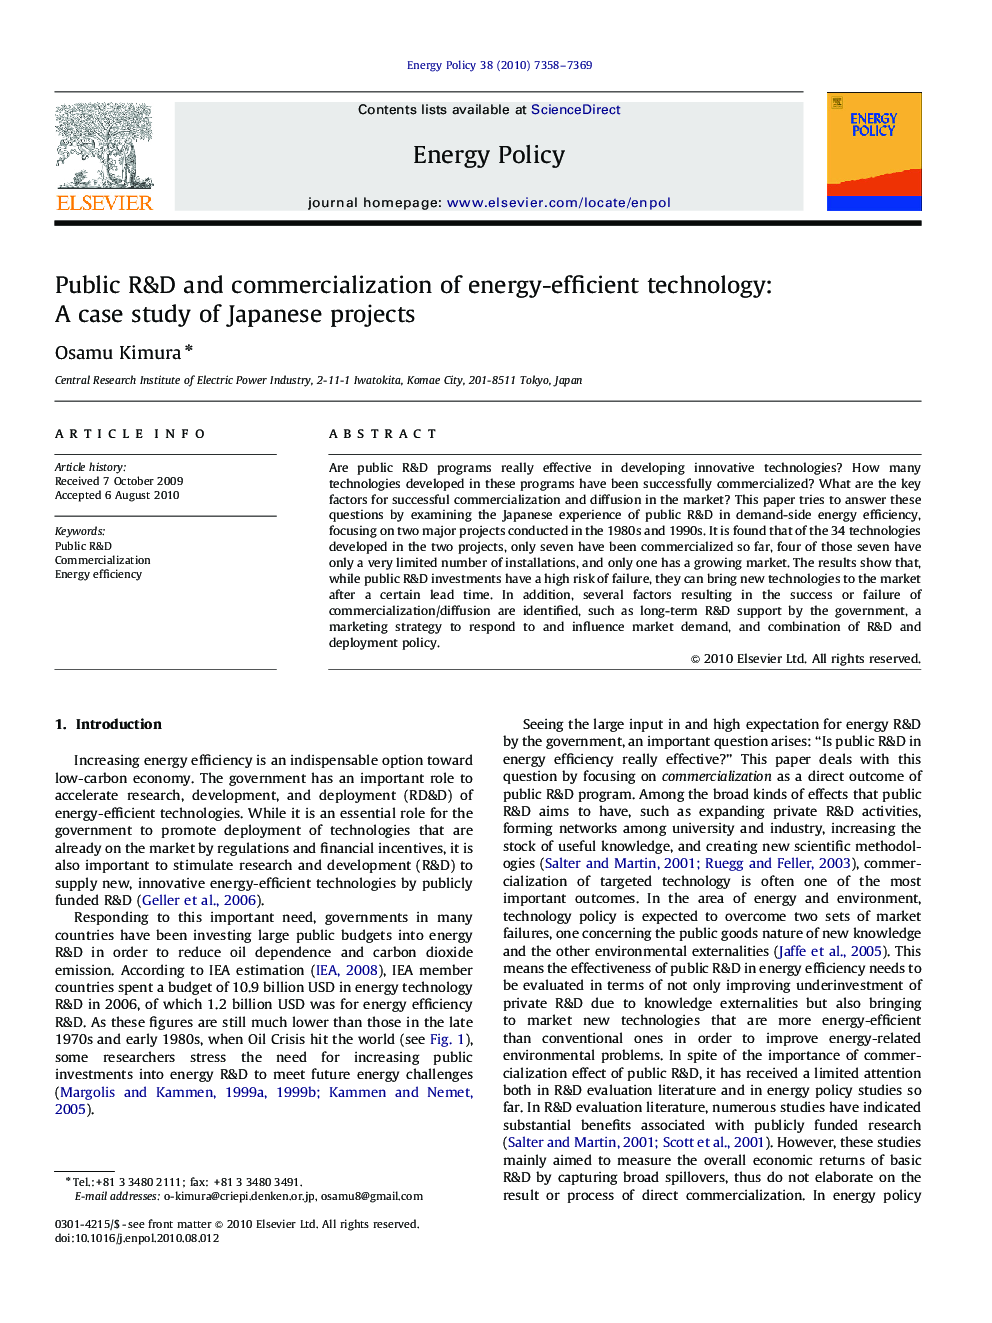 Public R&D and commercialization of energy-efficient technology: A case study of Japanese projects